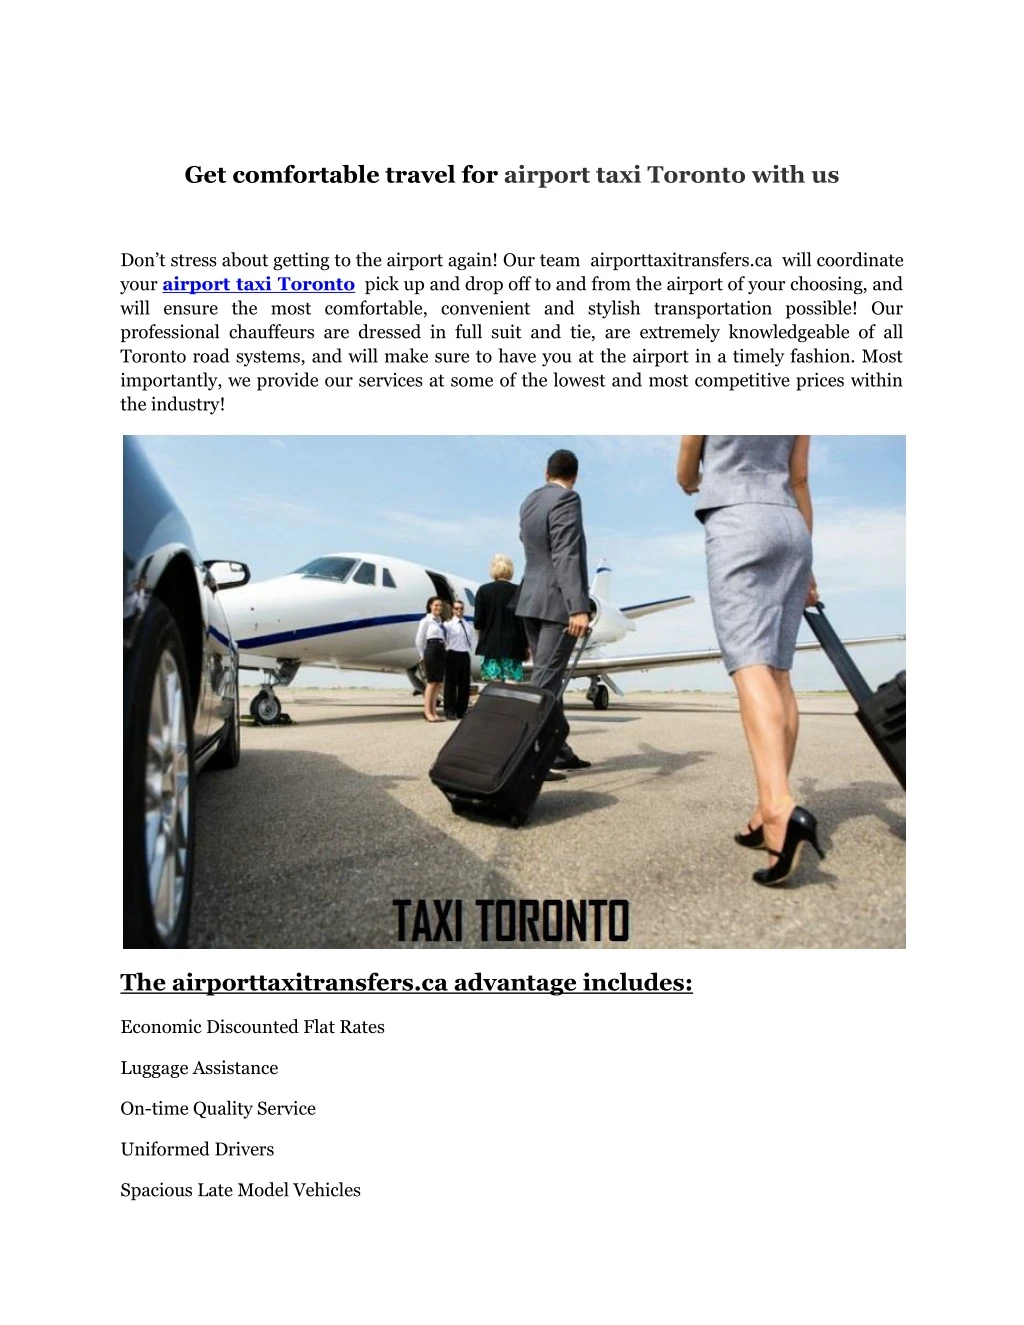 get comfortable travel for airport taxi toronto